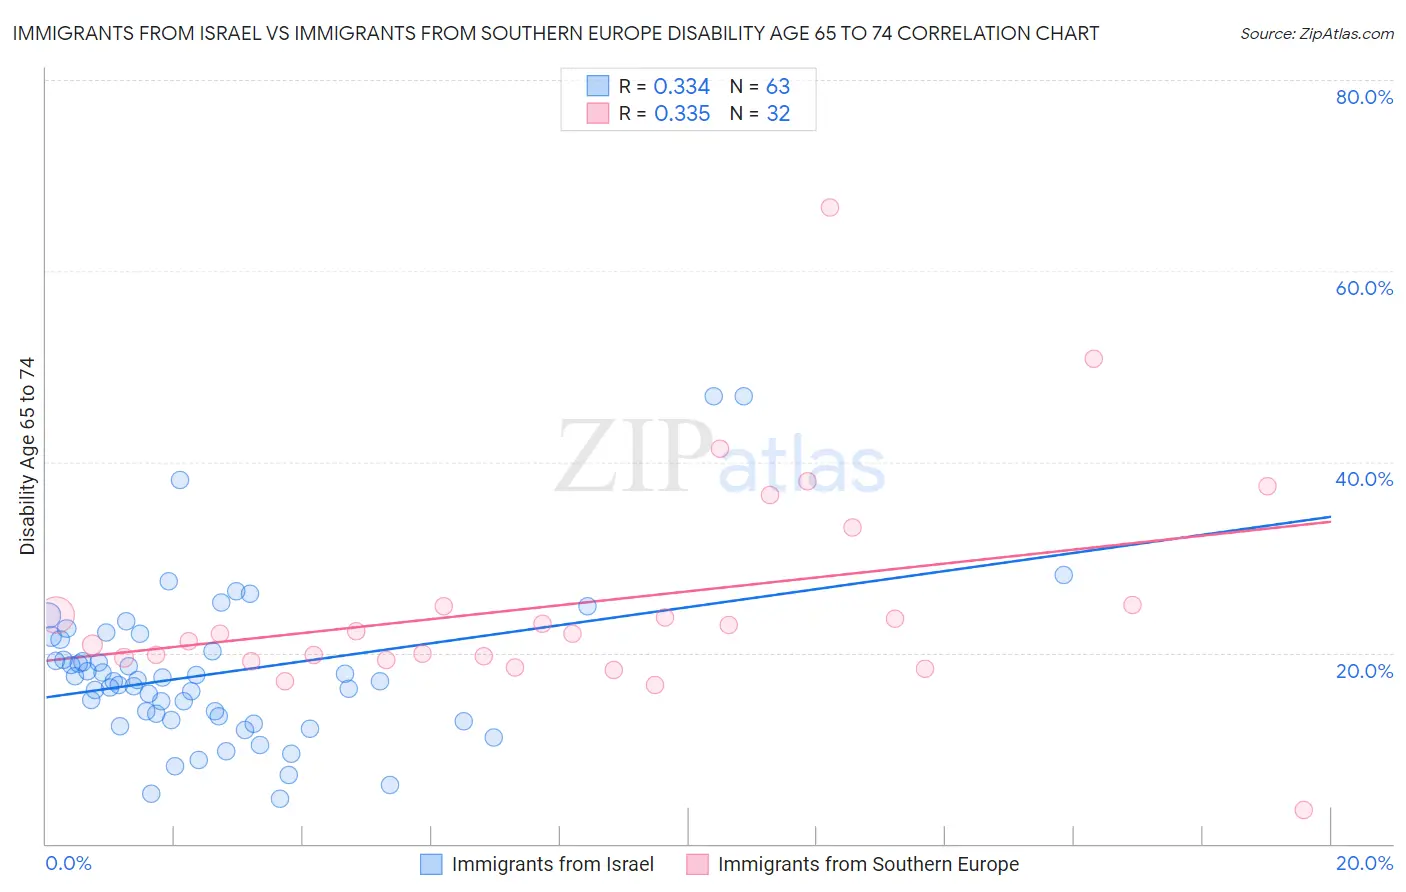 Immigrants from Israel vs Immigrants from Southern Europe Disability Age 65 to 74